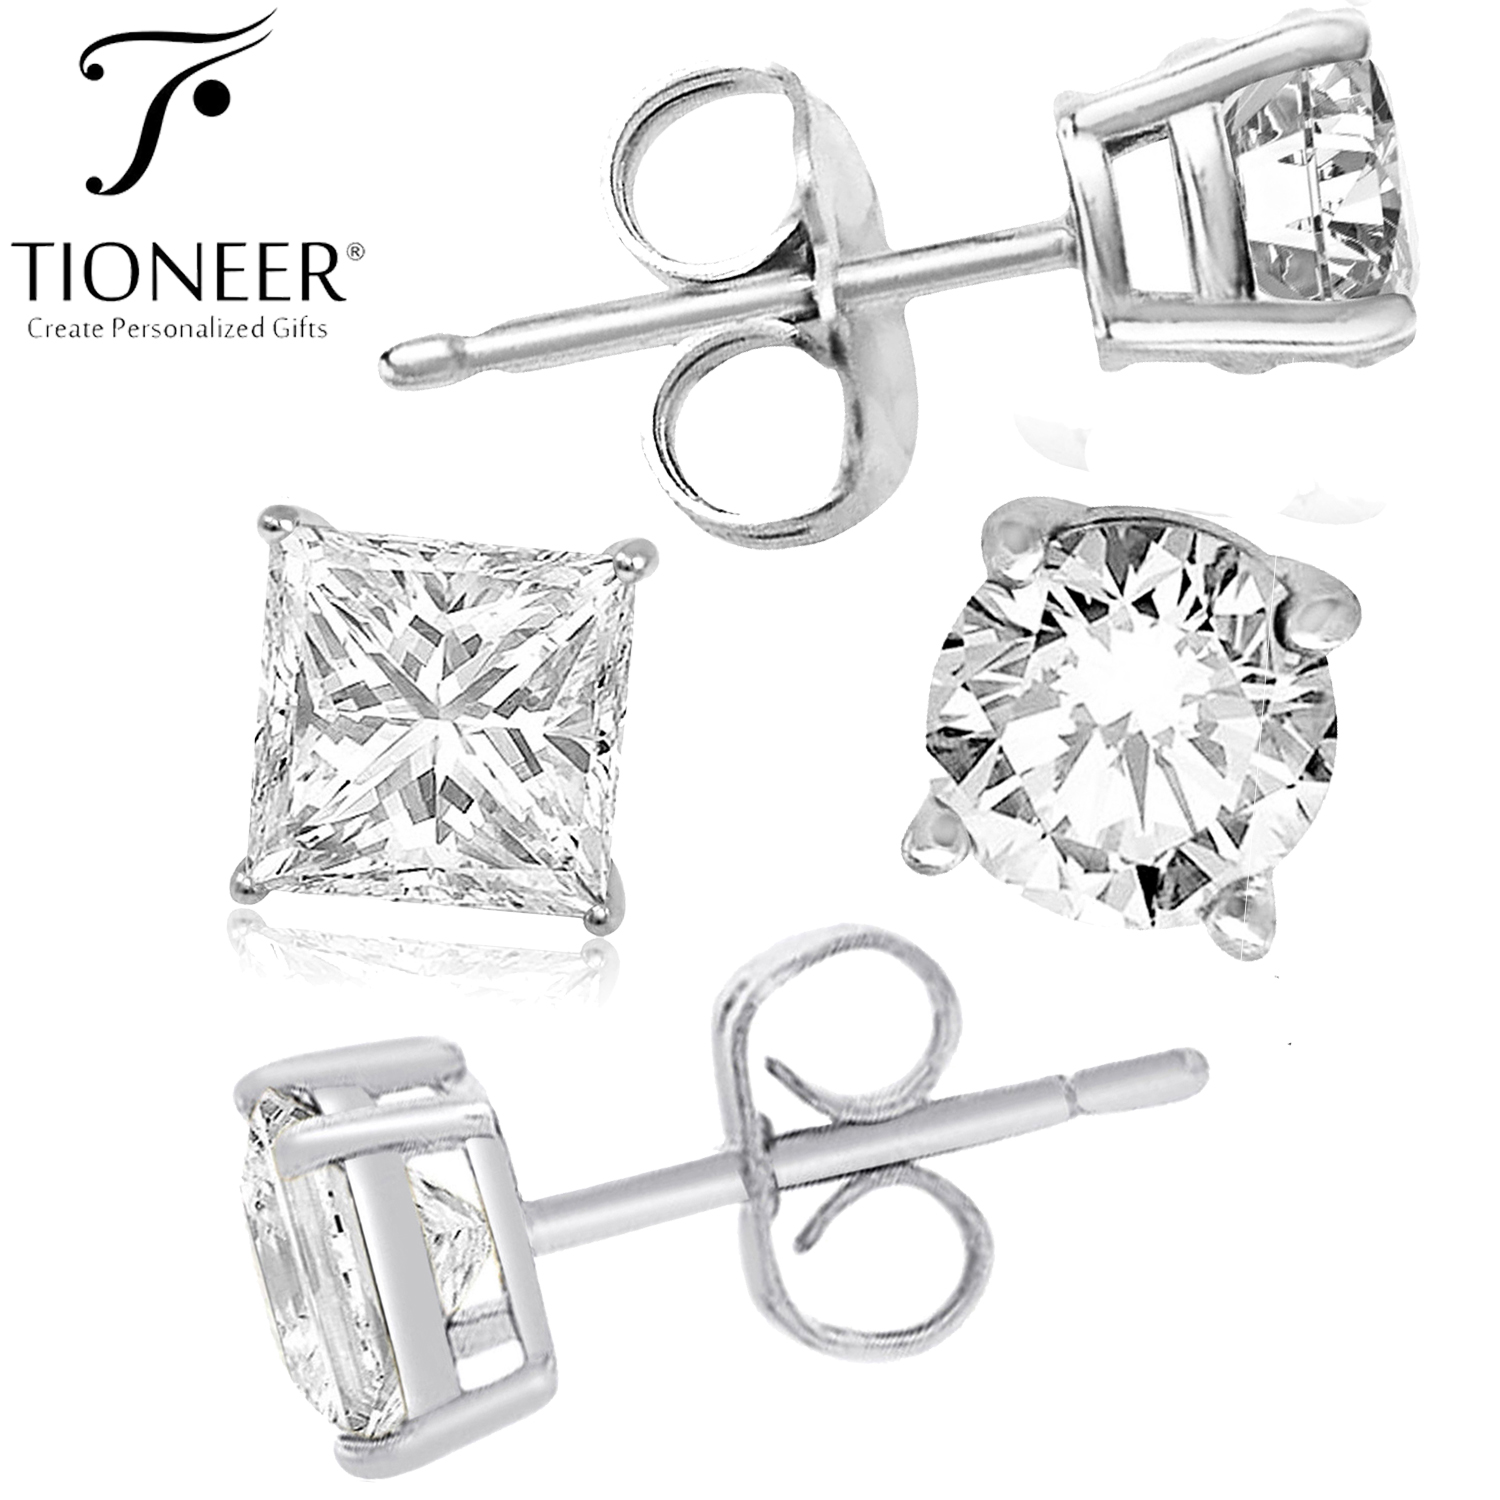 7mm Princess Square Cubic Zirconia 925 Sterling Silver Stud Earrings Details about  / 3mm